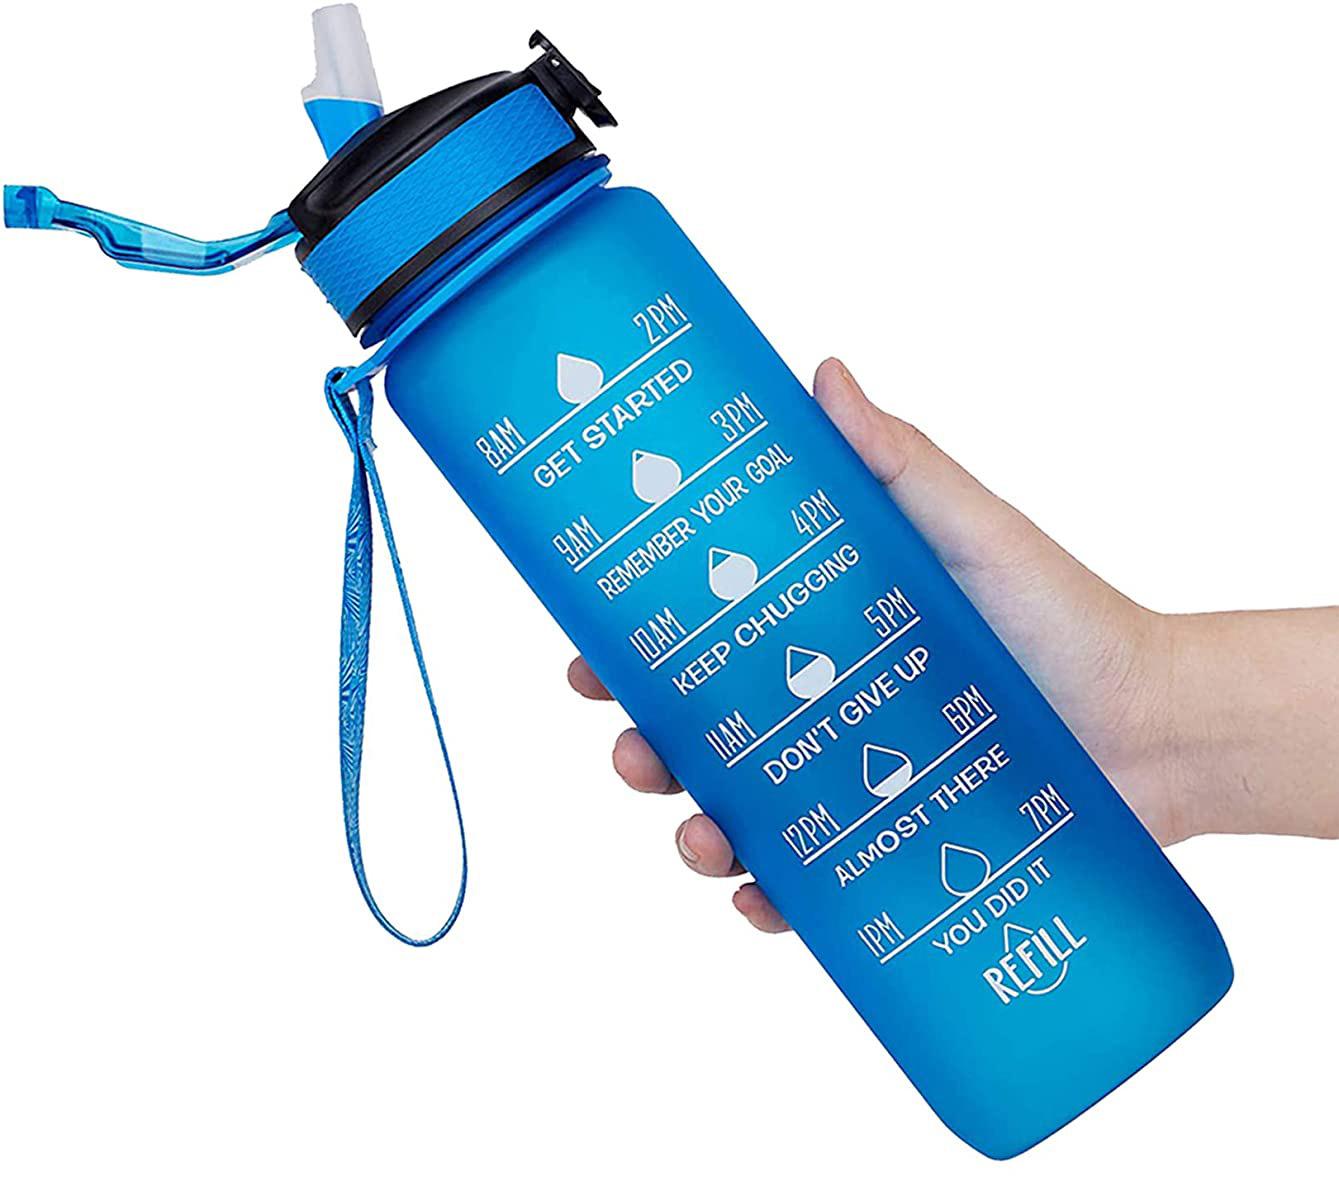 Giotto 32oz Leakproof Drinking Water Bottle for $12.74